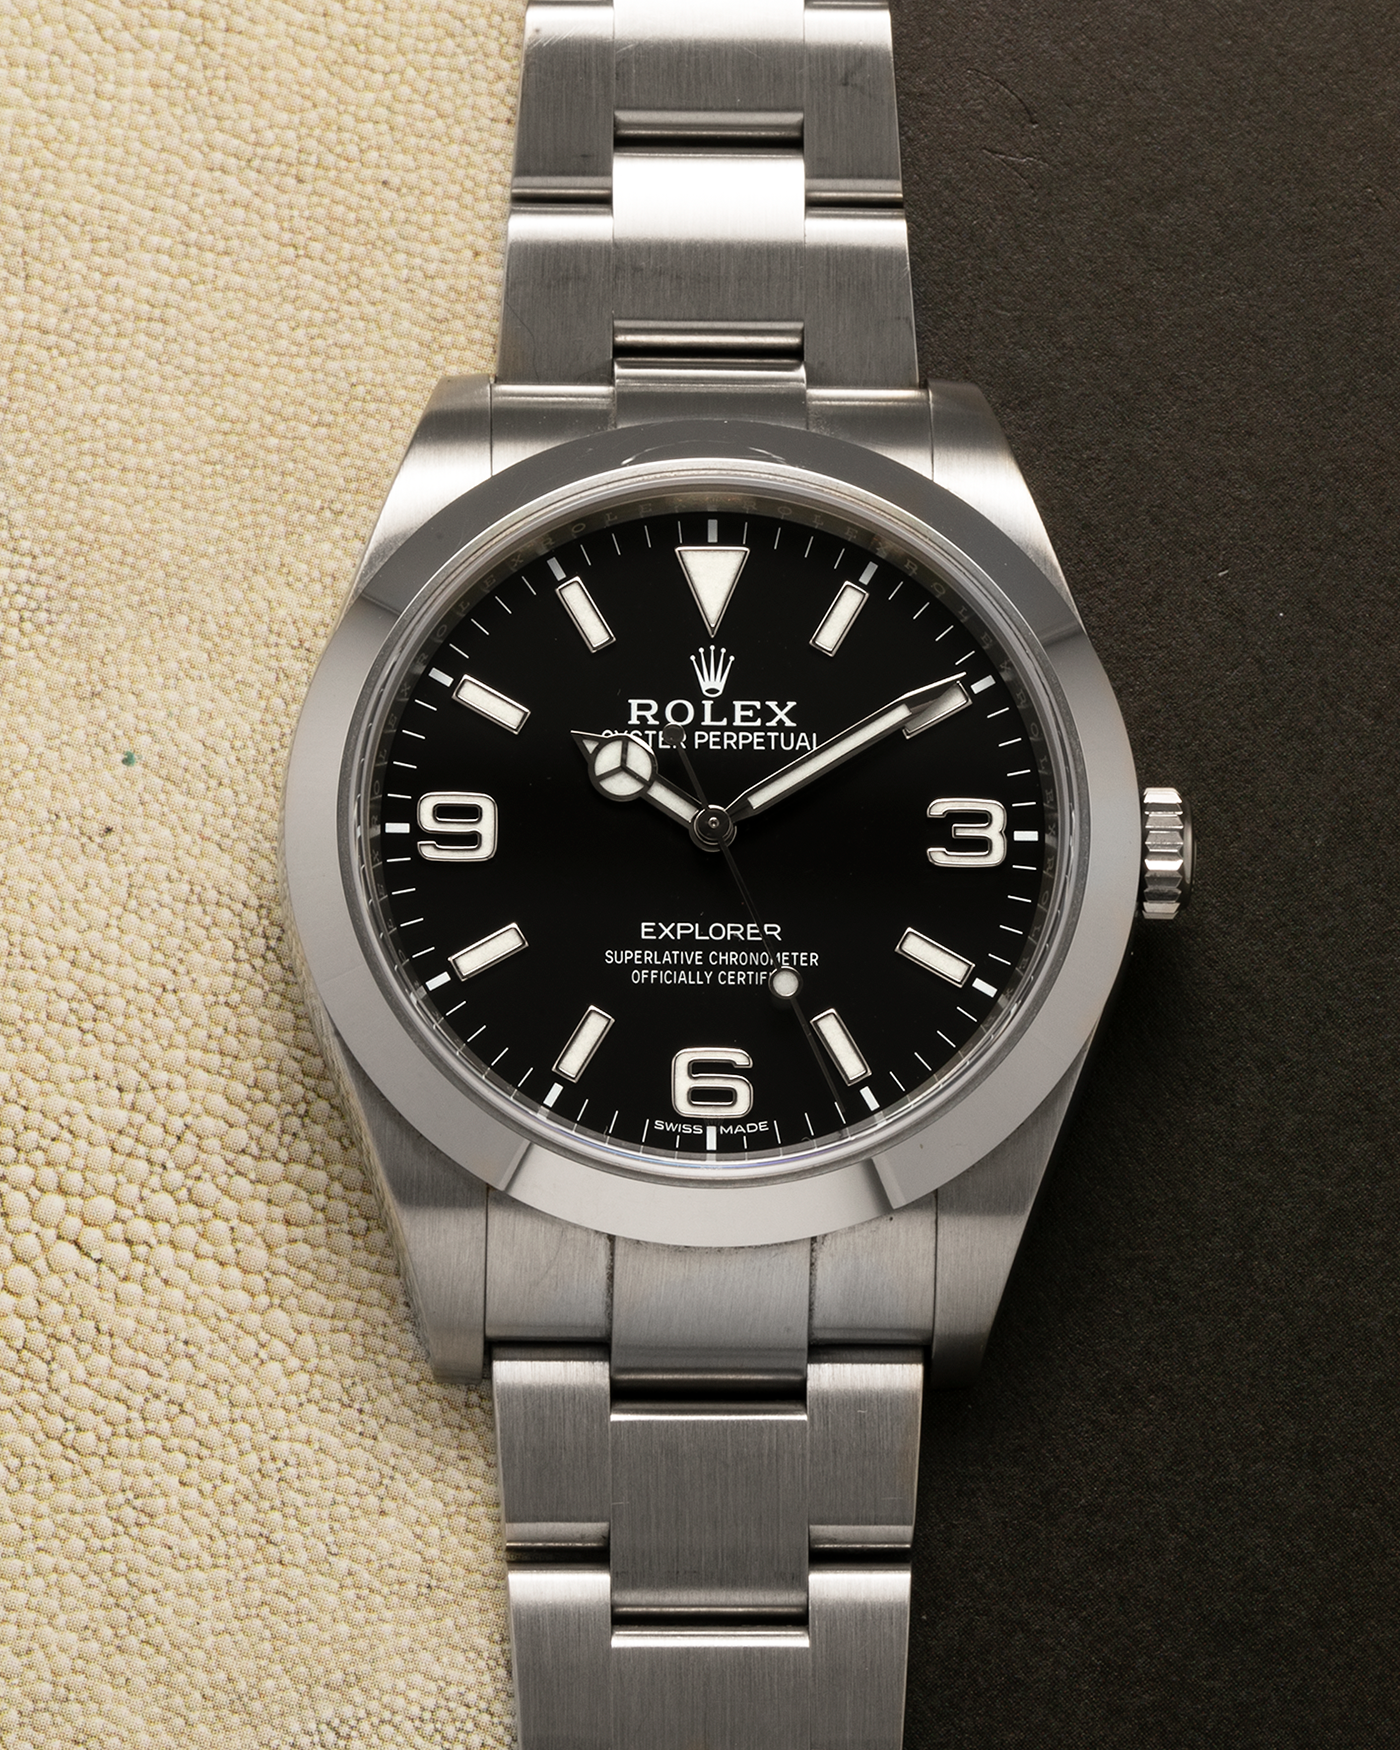 Brand: Rolex Year: 2018 Model: Oyster Perpetual Explorer I Reference Number: 214270 Case Material: Oystersteel (904L Stainless Steel) Movement: Rolex Cal. 3132, Self-Winding Case Diameter: 39mm Lug Width: 20mm Bracelet: Rolex Oyster Bracelet in Oystersteel with Signed Oysterlock Clasp